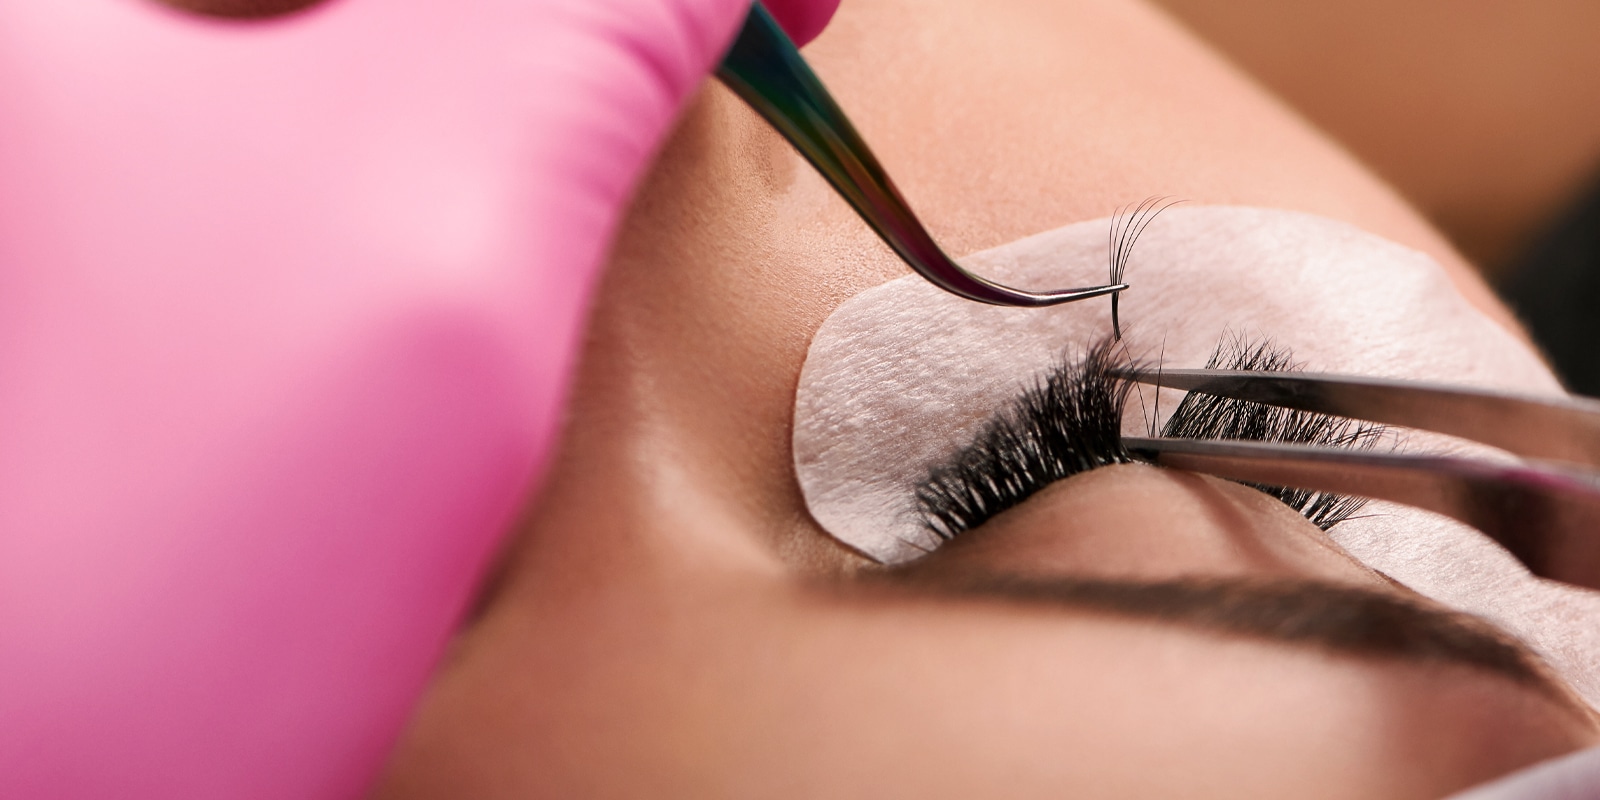 An image of a person getting her eye lash added